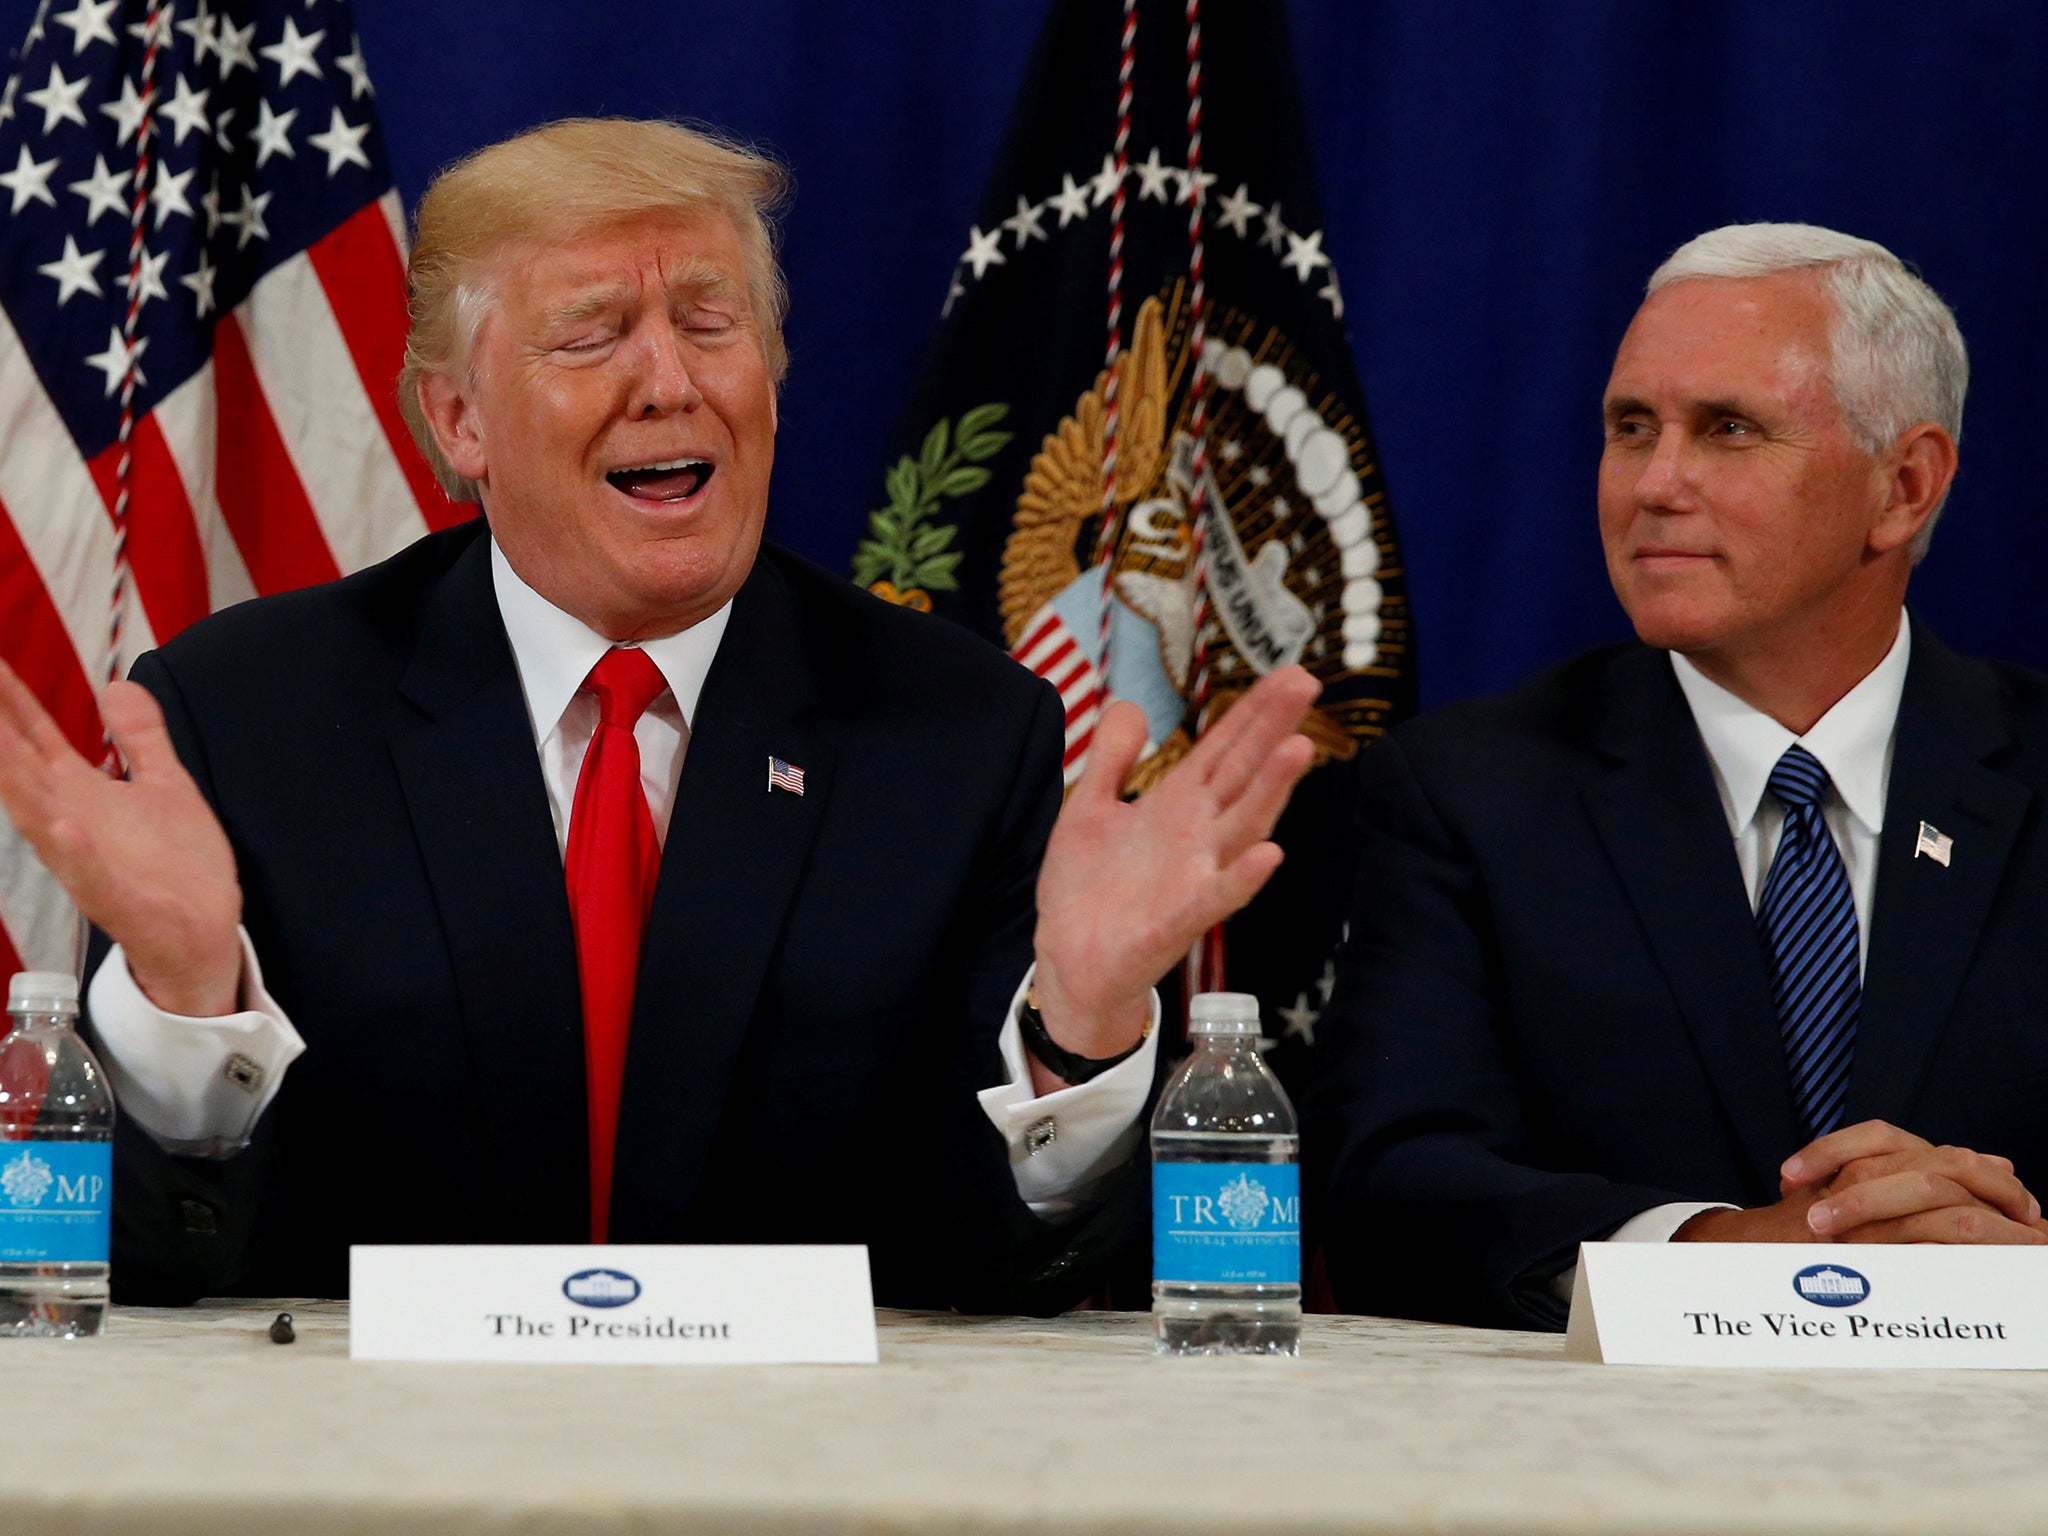 US President Donald Trump with Vice President Mike Pence speaking to reporters following a security briefing